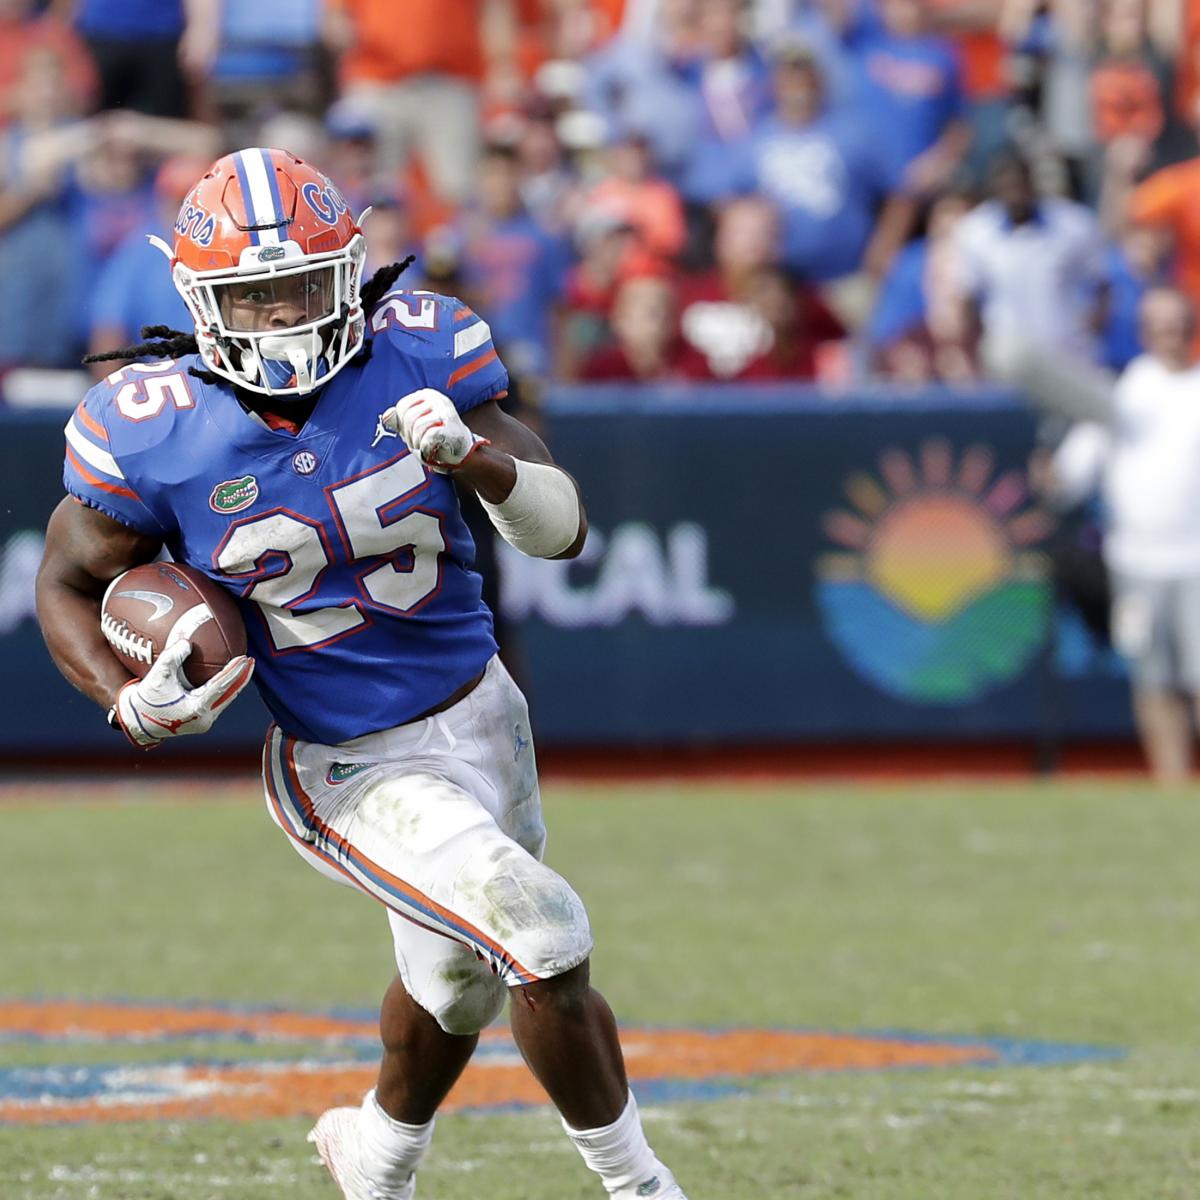 Peach Bowl 2018: Updated Odds and Preview for Michigan vs. Florida ...